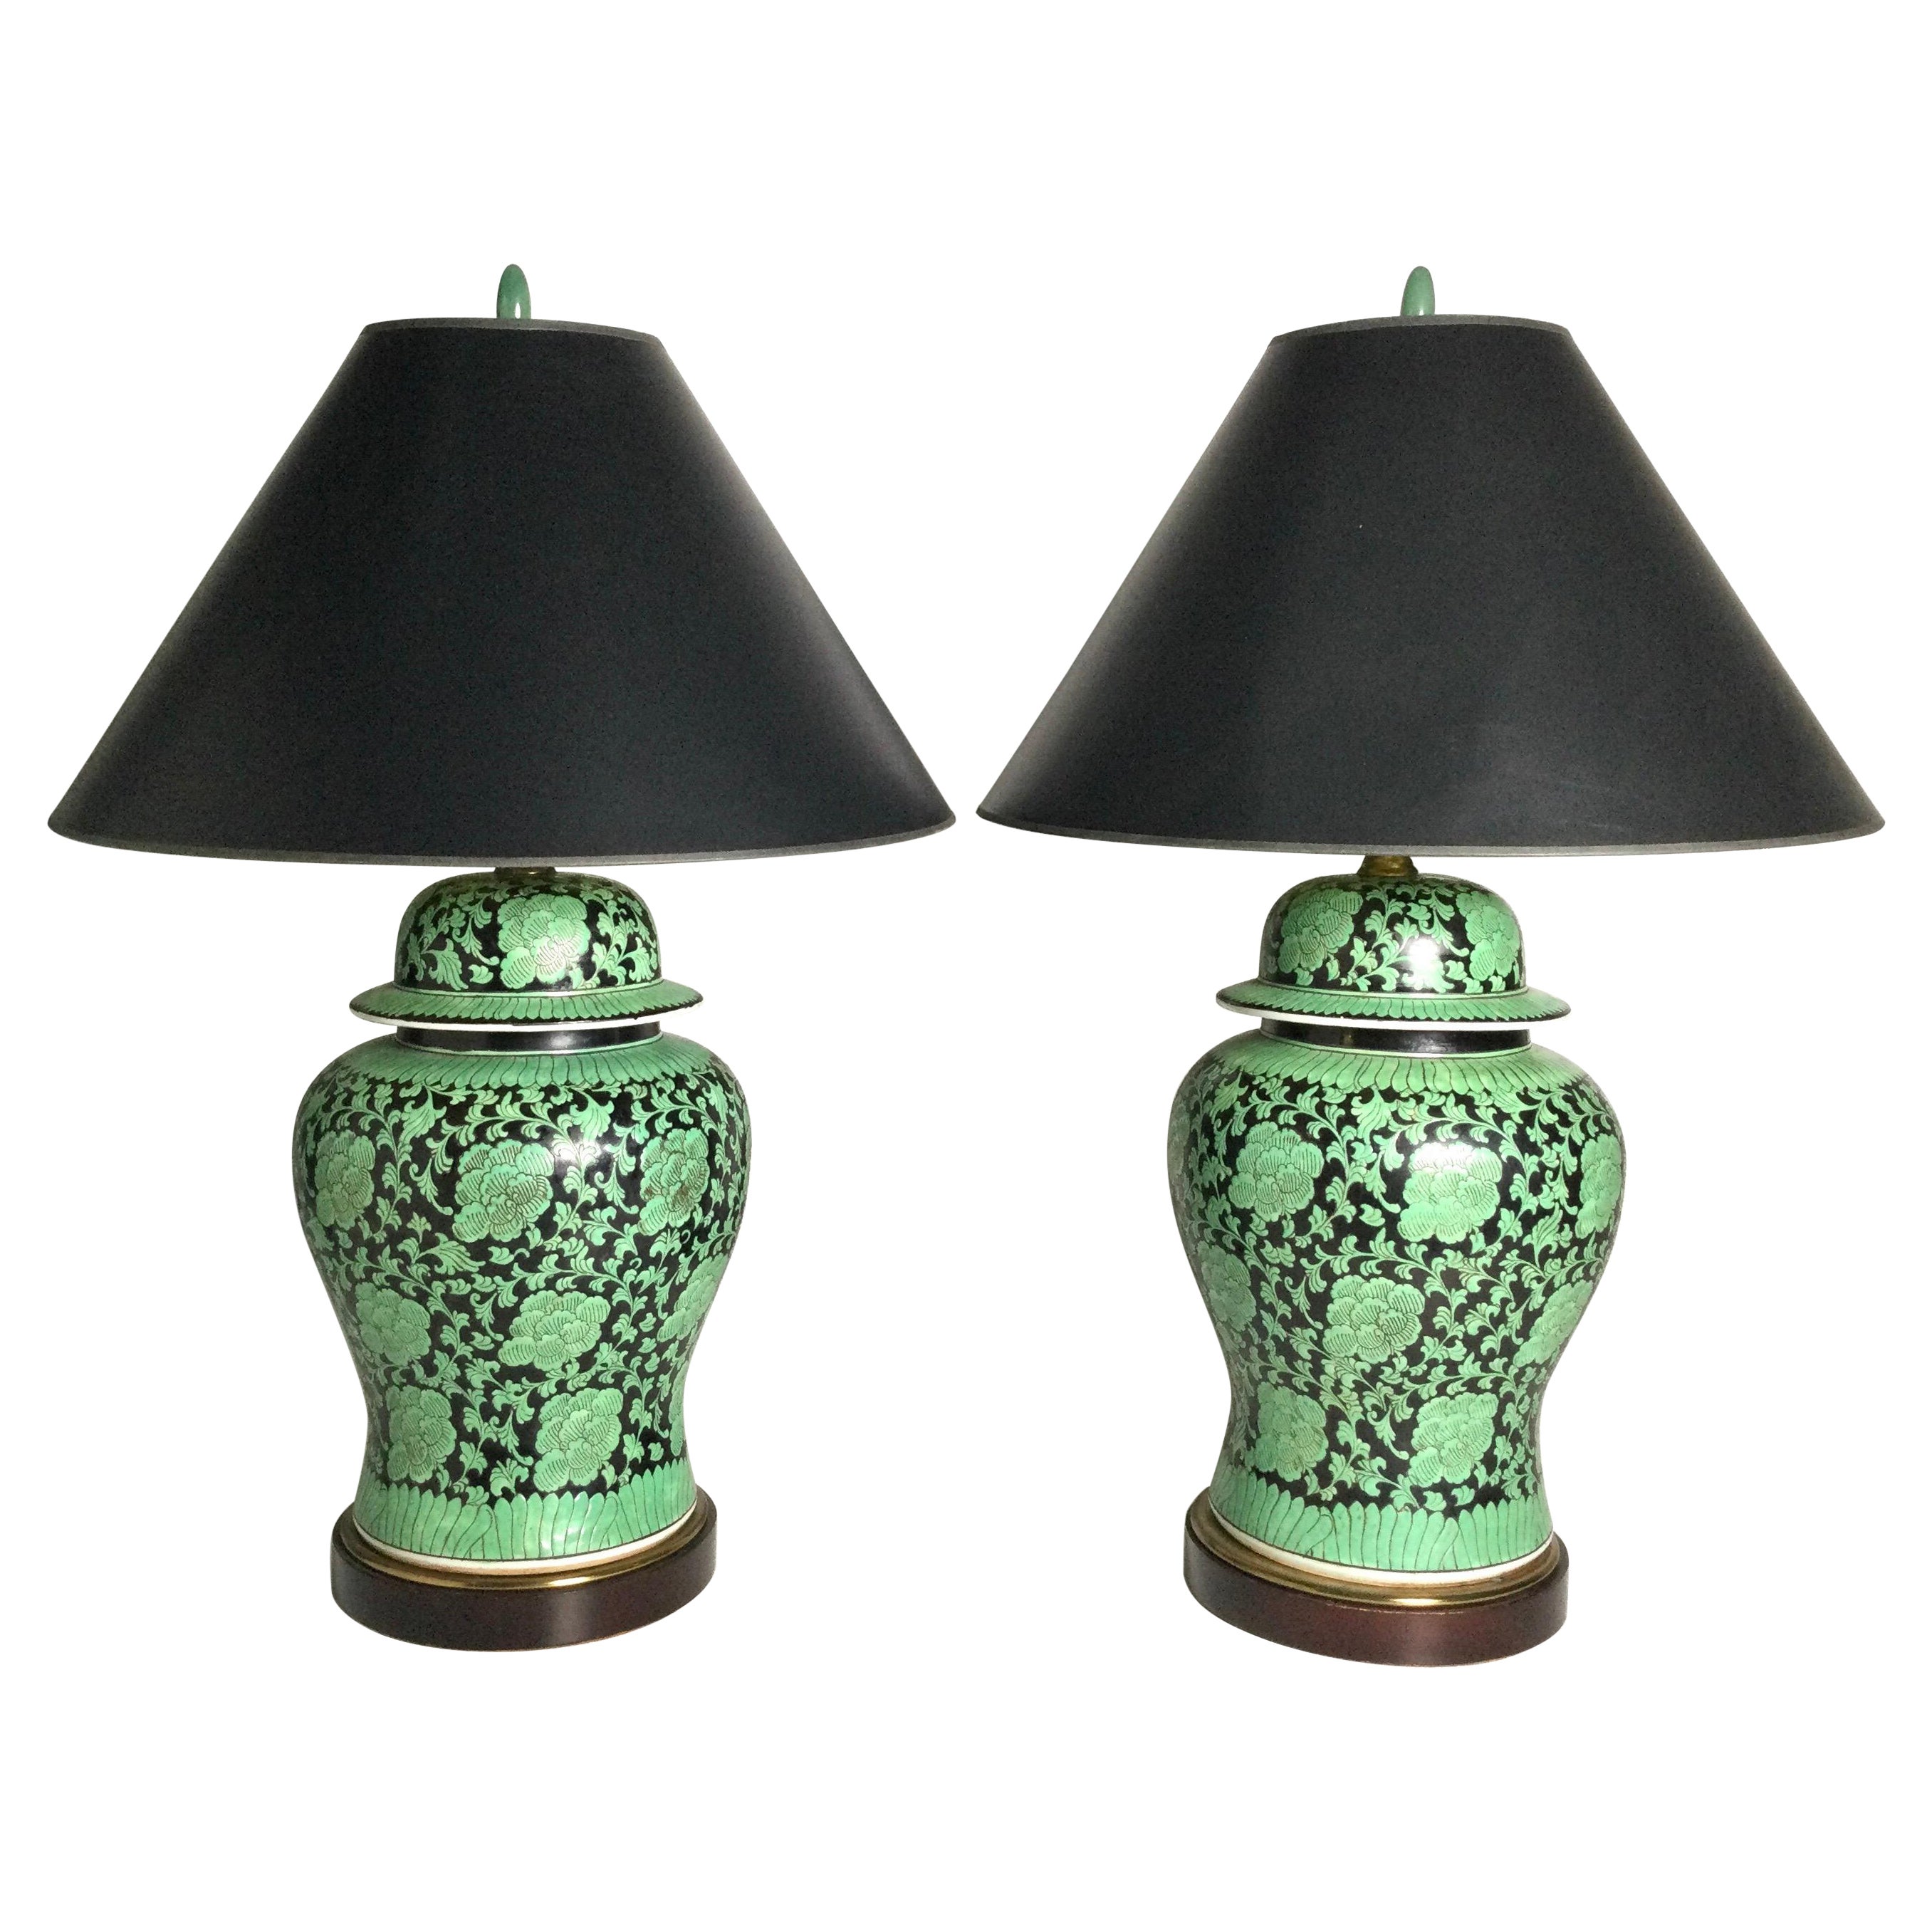 Pair of Chinese Green and Black Porcelain Ginger Jar Lamps